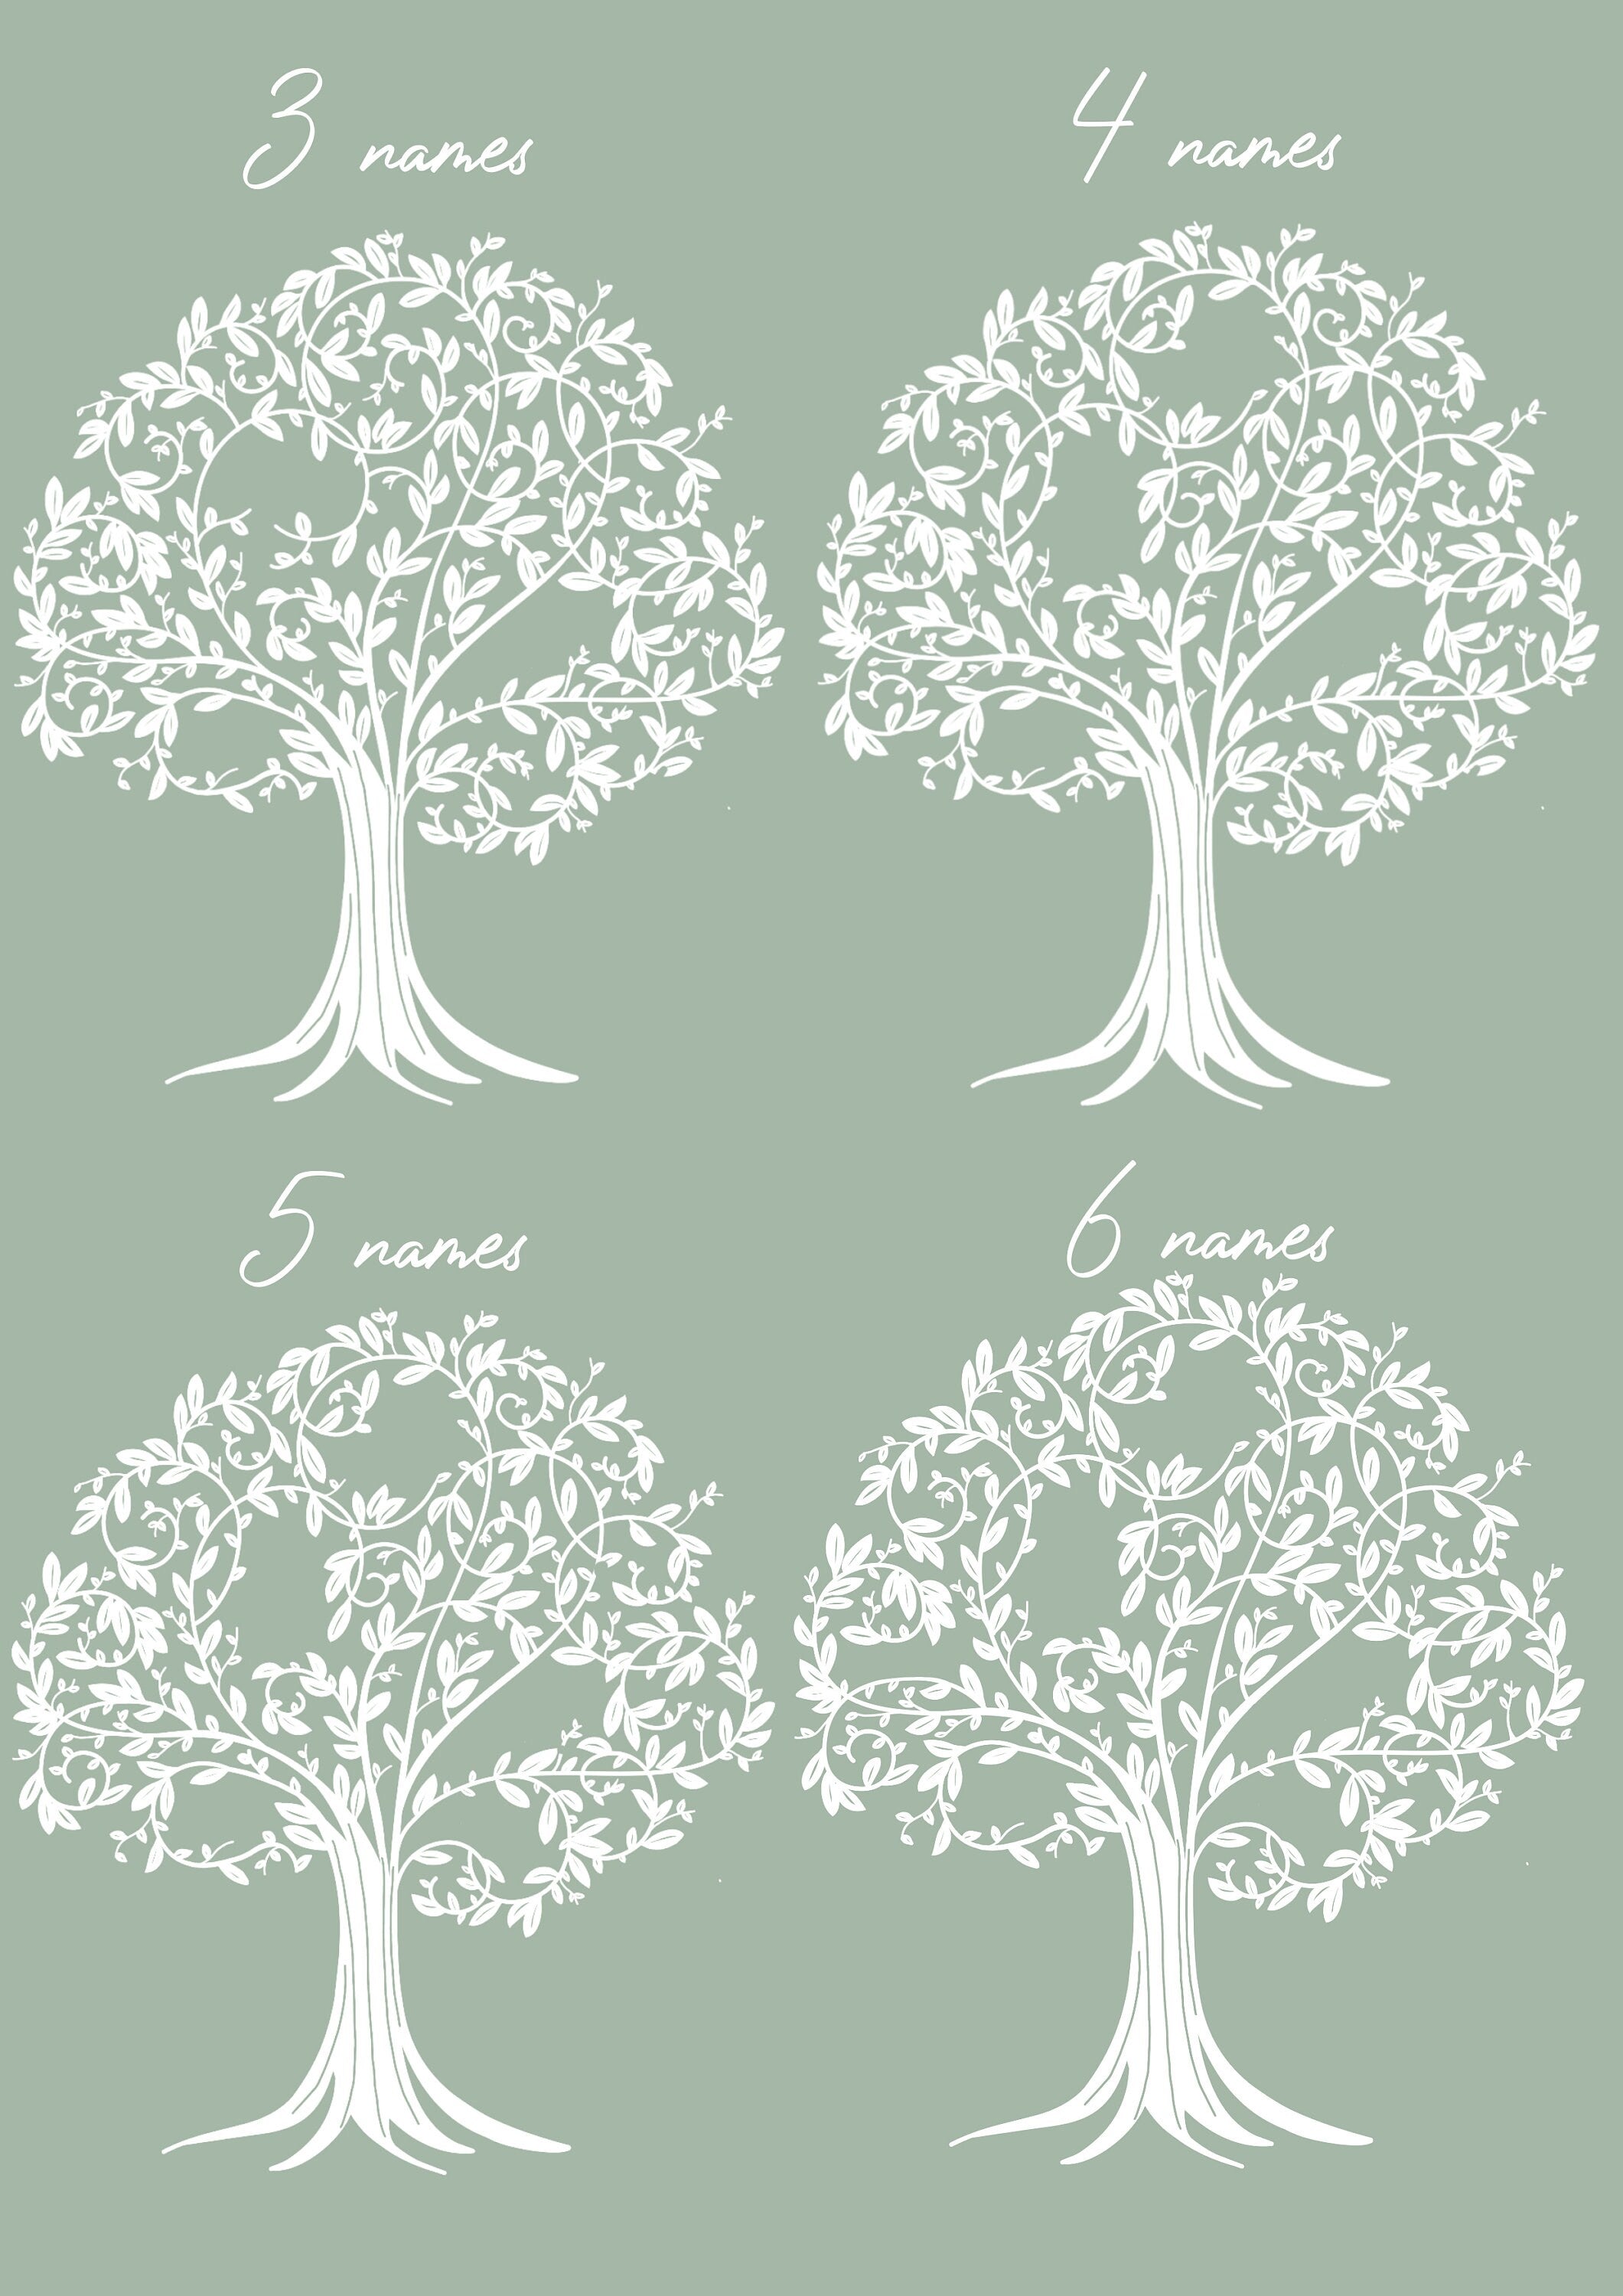 Family Tree Print/ Gift for mum / Mother's Day print /Mothers Day gift / Mum's birthday /Mother's Day / Home print / Mum print/ Family print